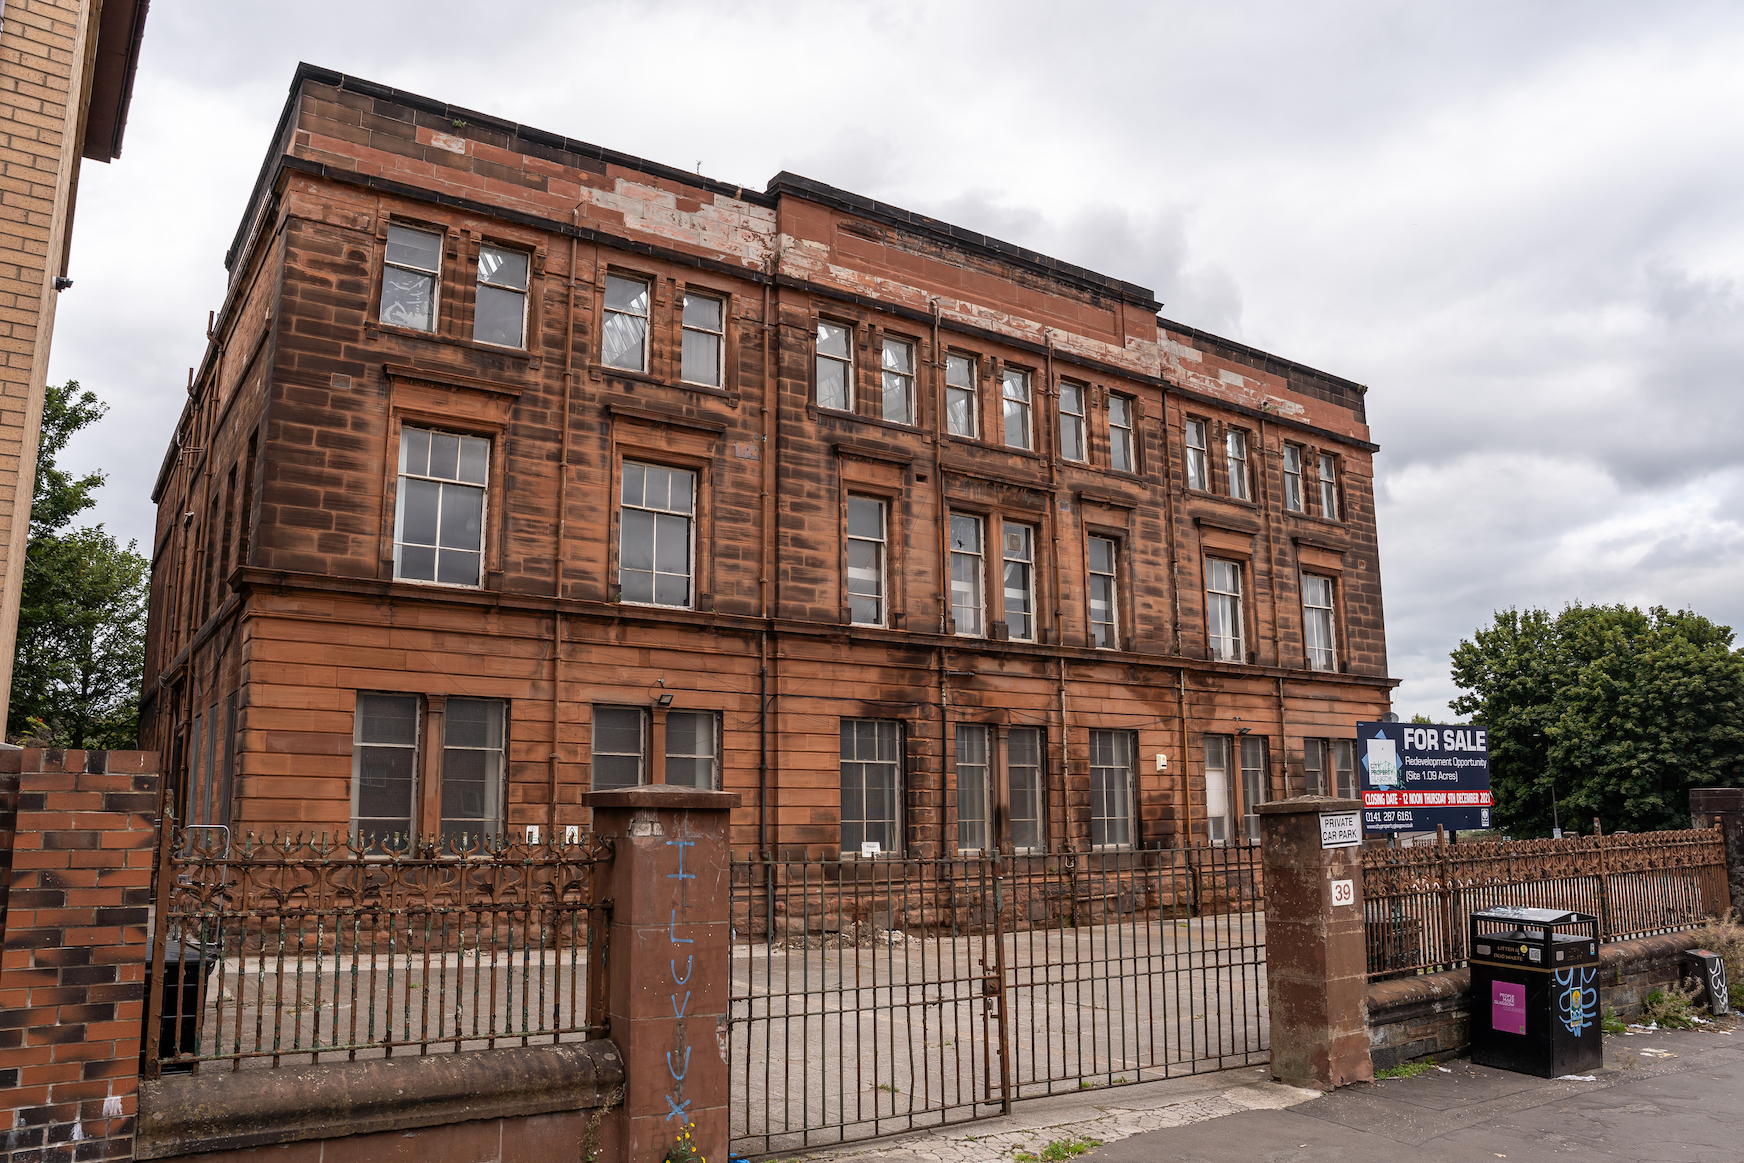 Outside the old Napiershall Street School building3 1 KELVIN PROPERTIES BEGINS WORK ON 'GOLD STANDARD'  RESTORATION OF 19TH CENTURY SCHOOL IN GLASGOW'S WEST END AS PART OF 49-HOME DEVELOPMENT